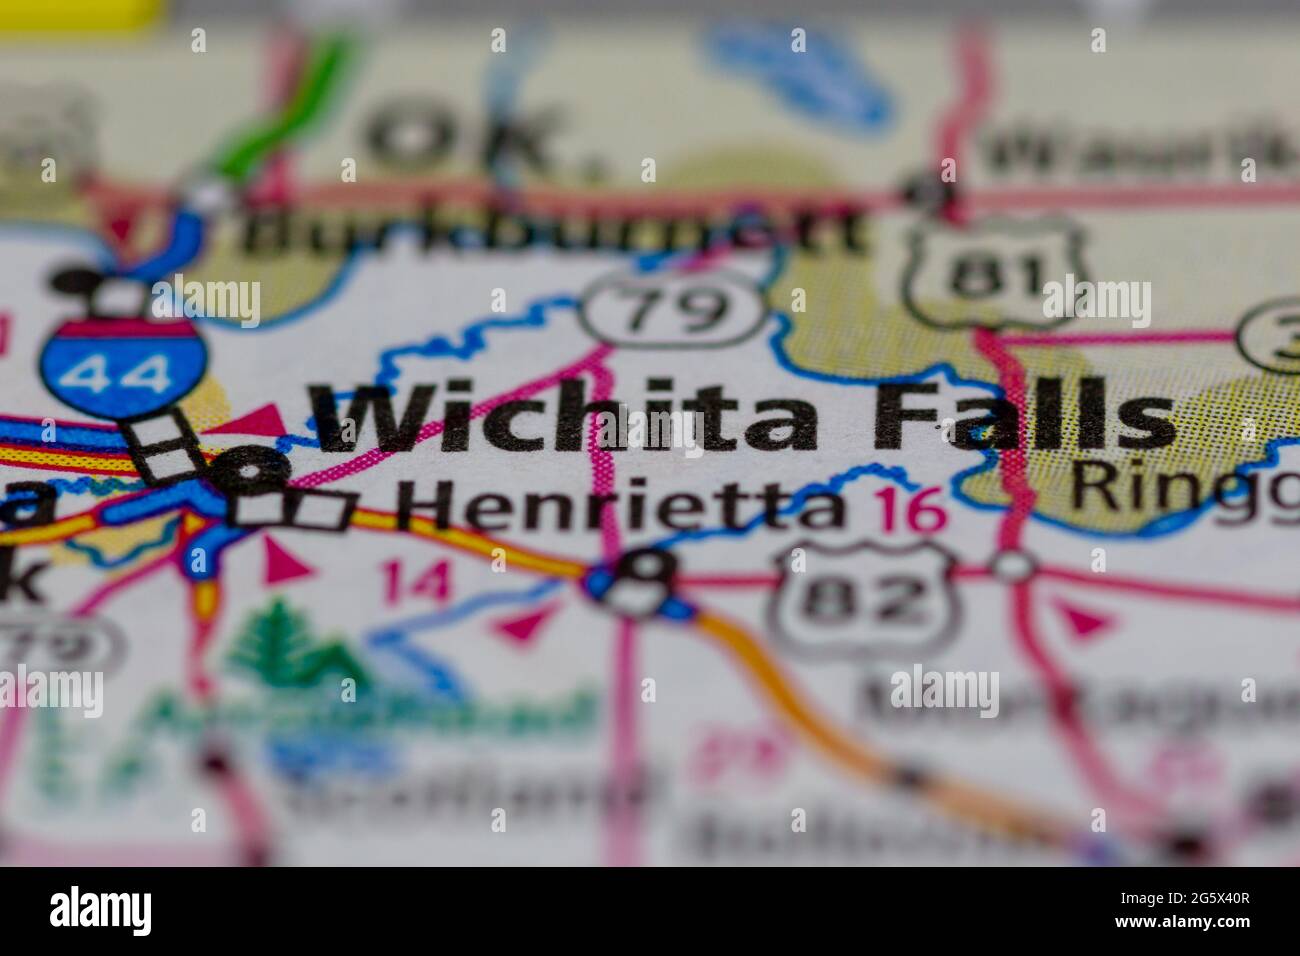 Wichita Falls Texas USA shown on a Geography map or Road map Stock Photo